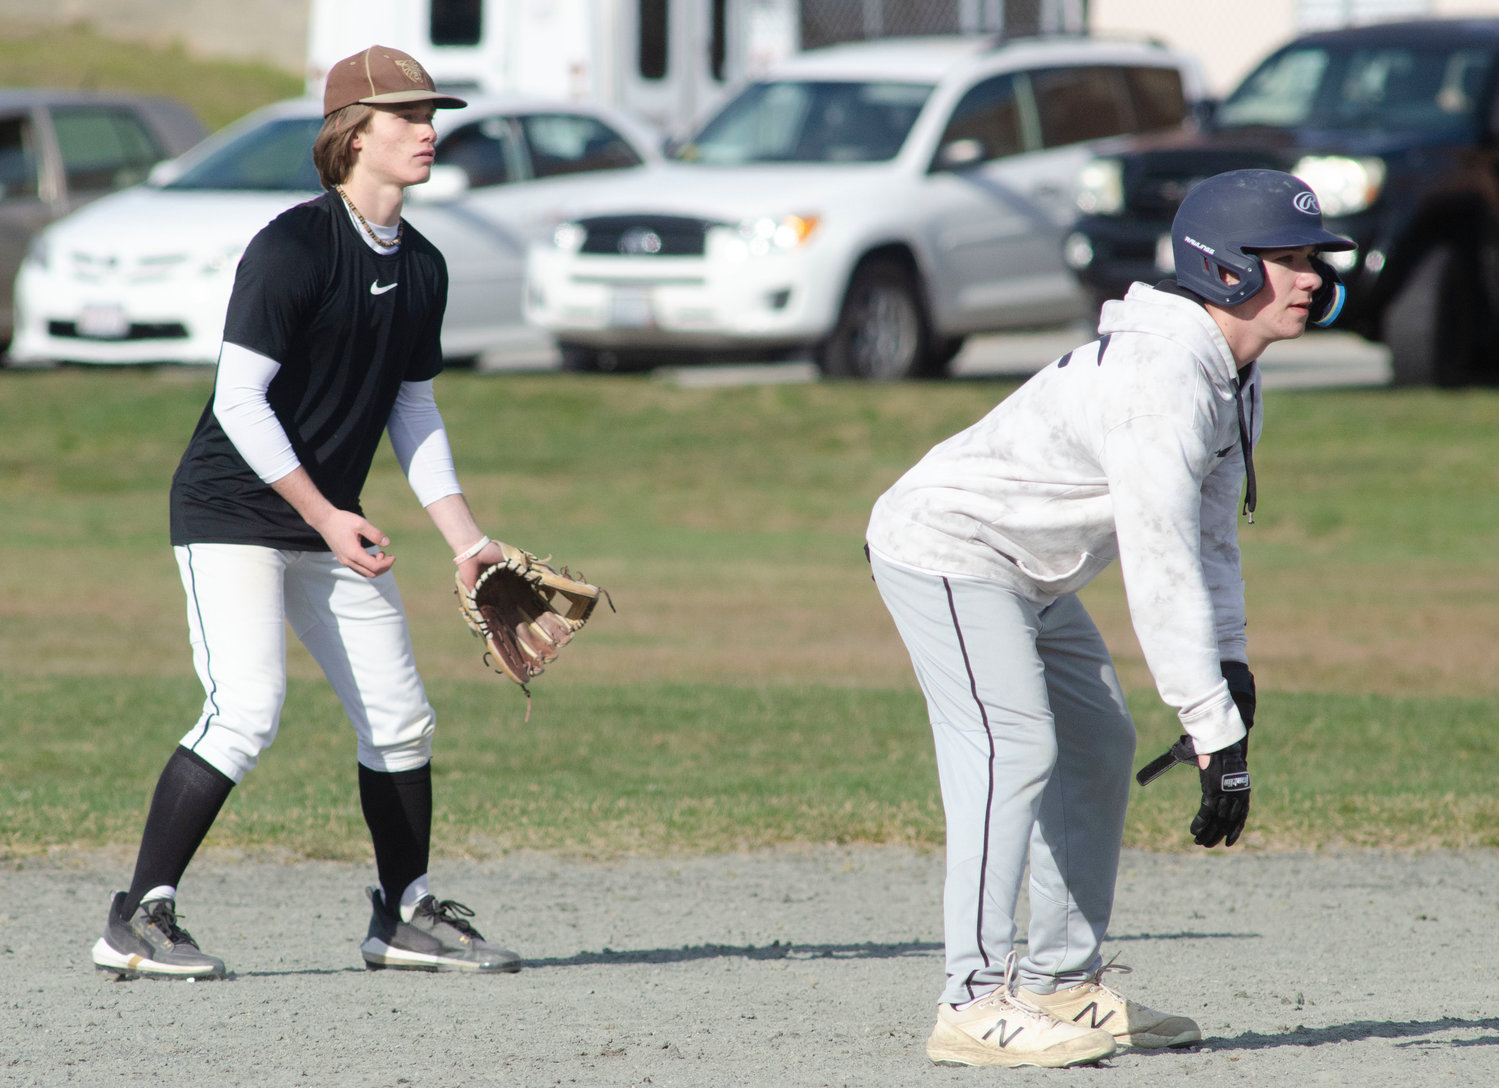 Shortstop Noah Sowle preps for action as the Gallant throws a pitch.